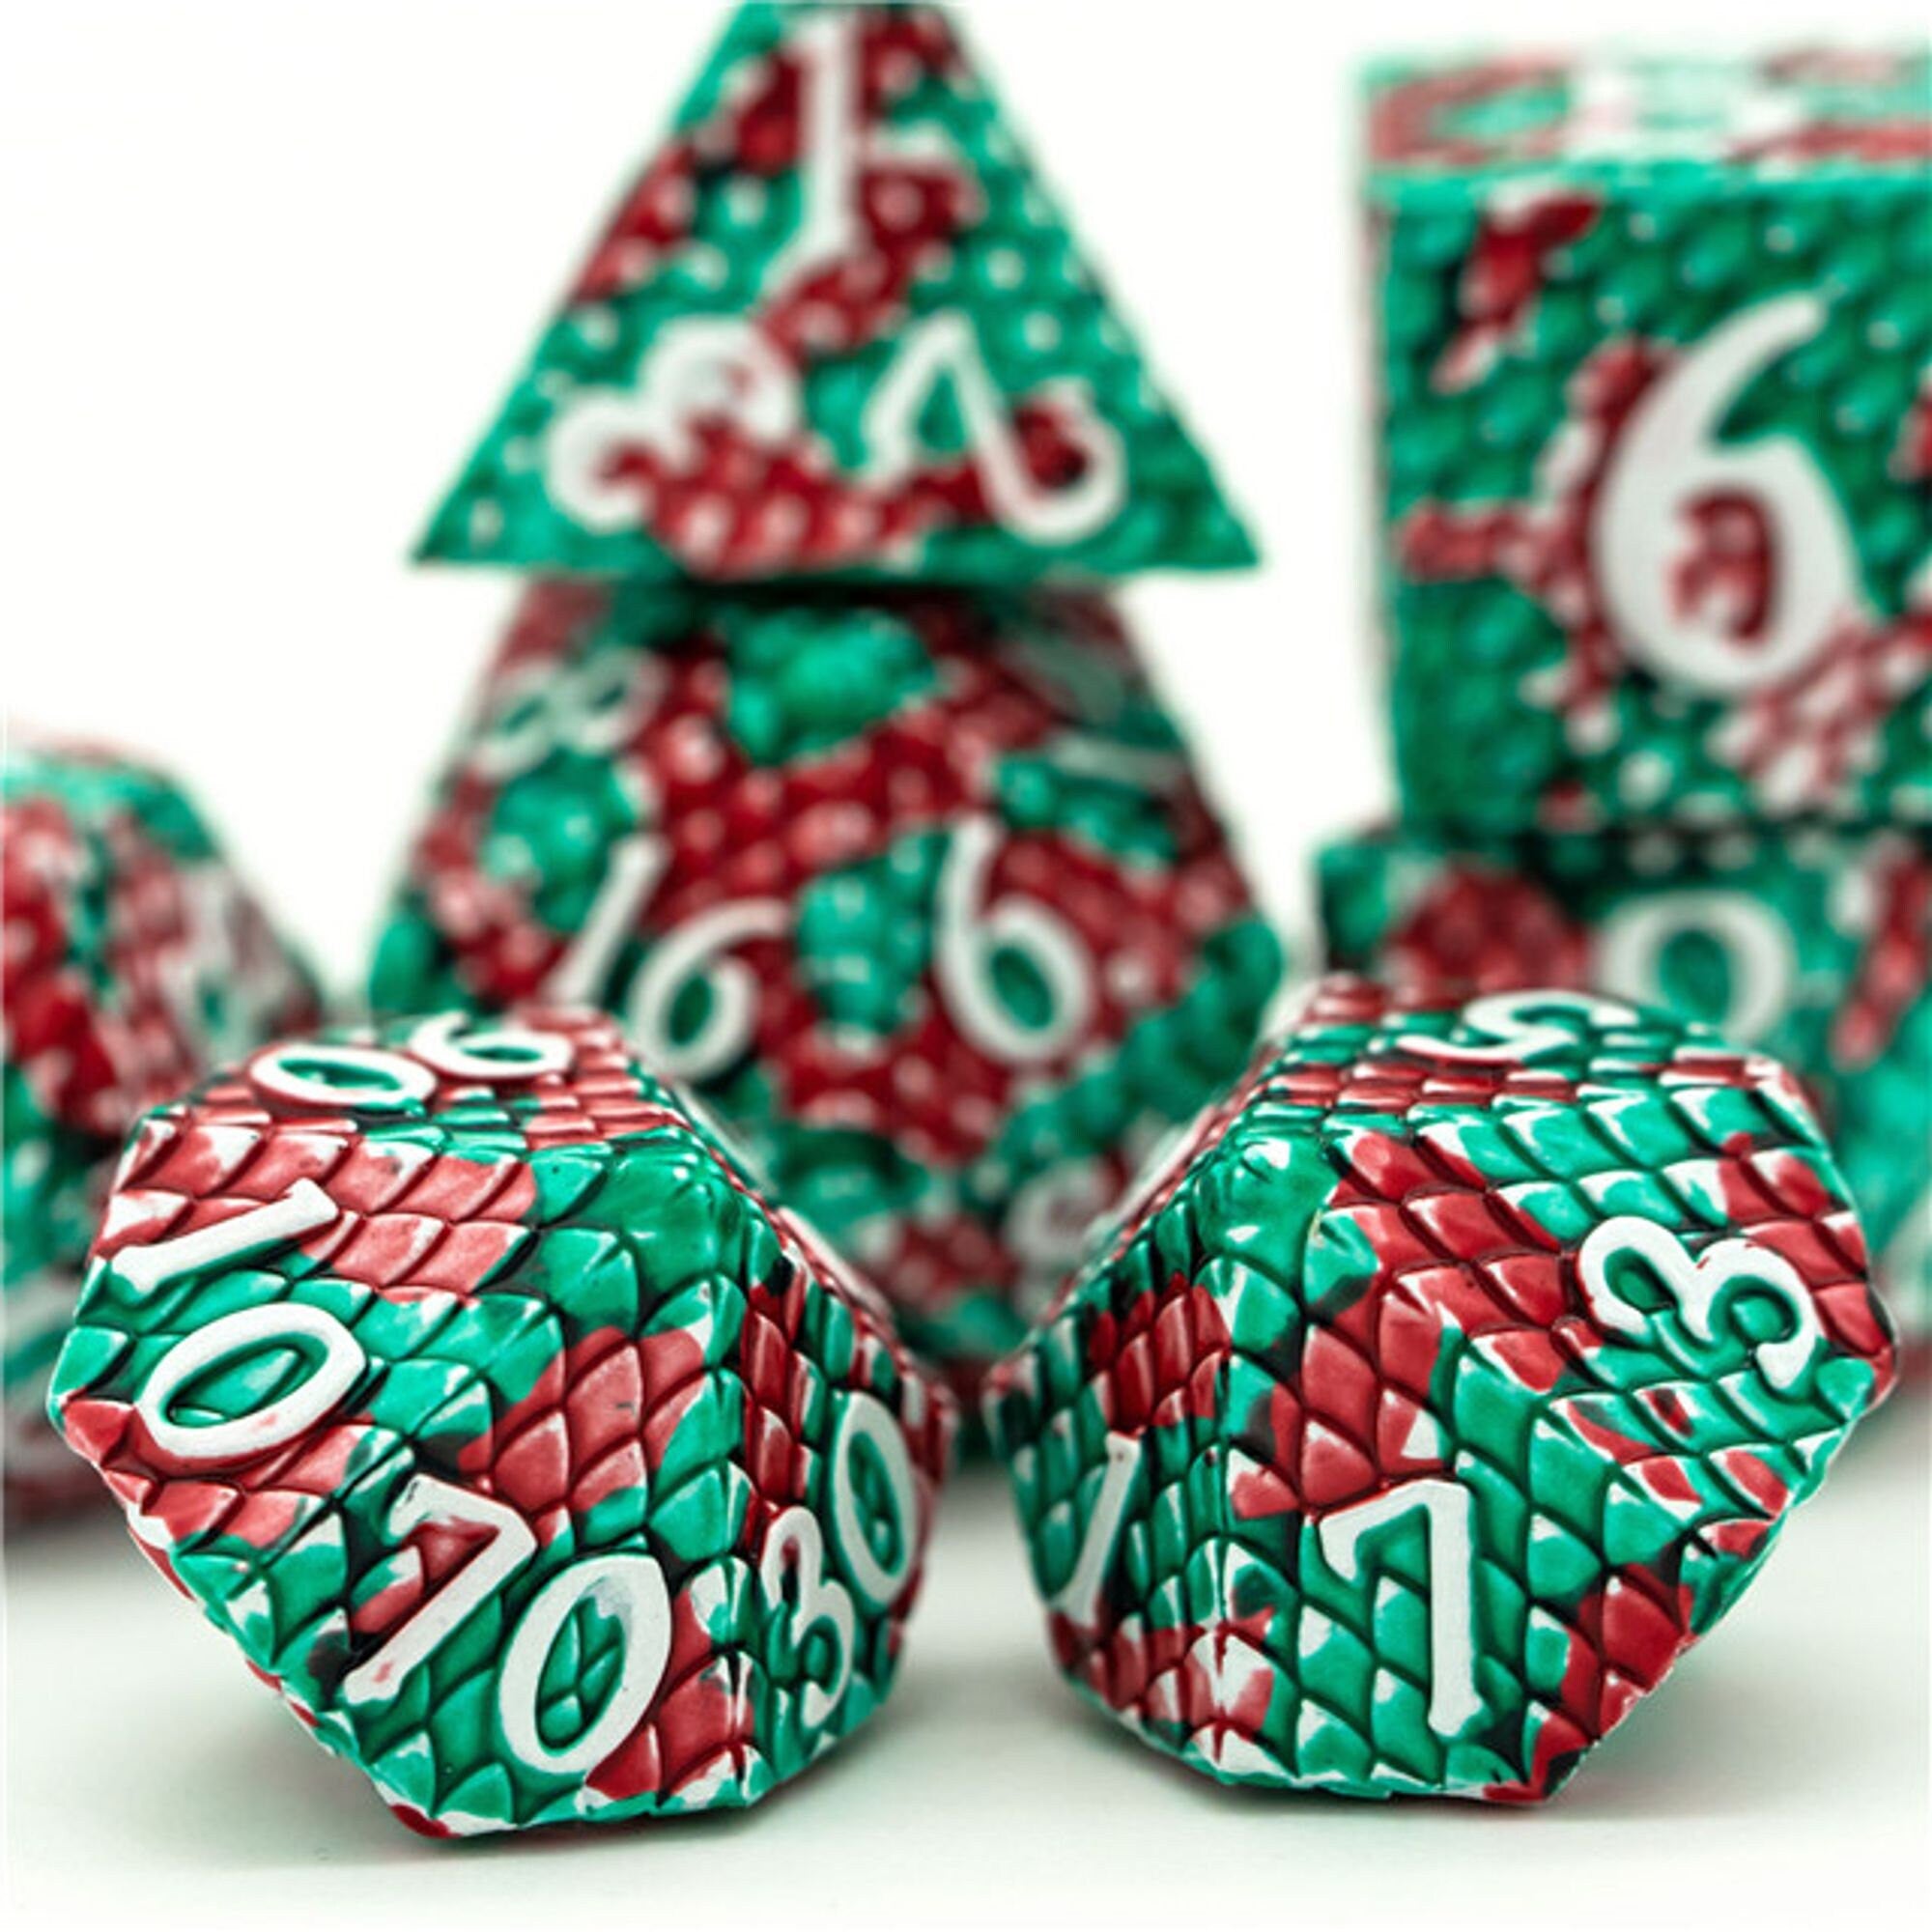 Dragon Blooded Green Metal Scaled Style DND/TTRPG Dice set - Dicemaniac